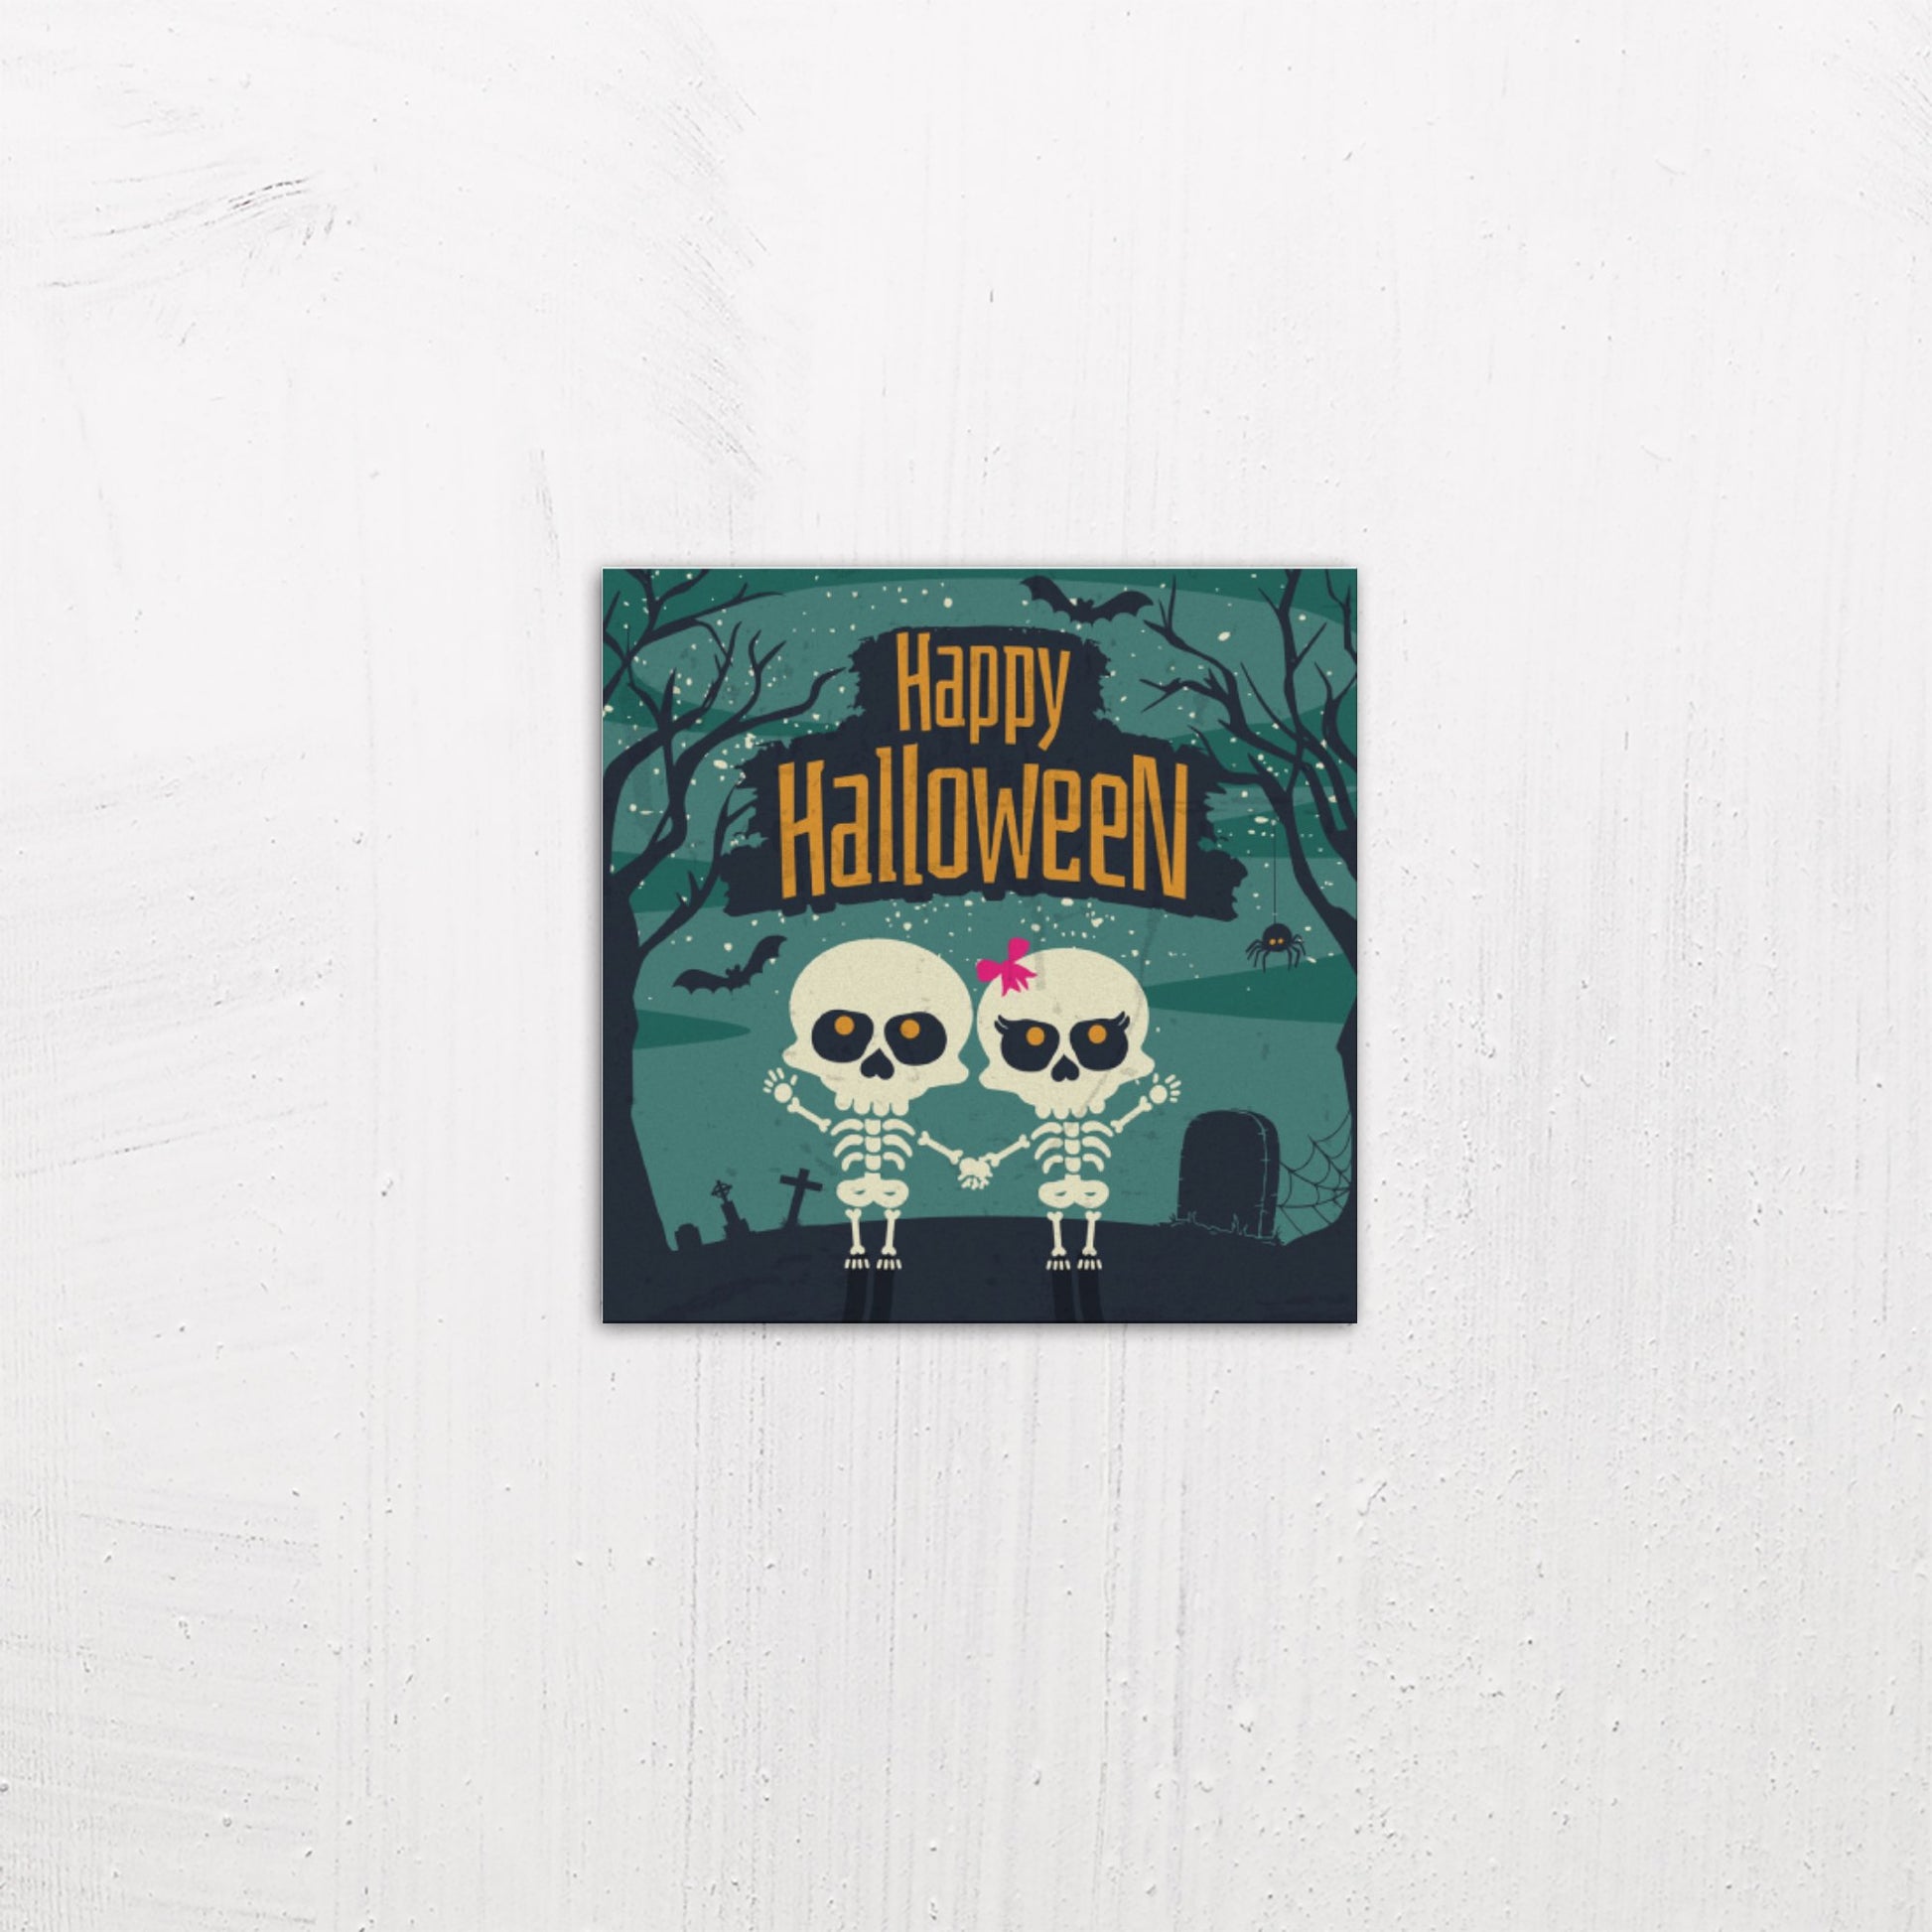 A small size metal art poster display plate with printed design of a Happy Halloween Cute Skeletons